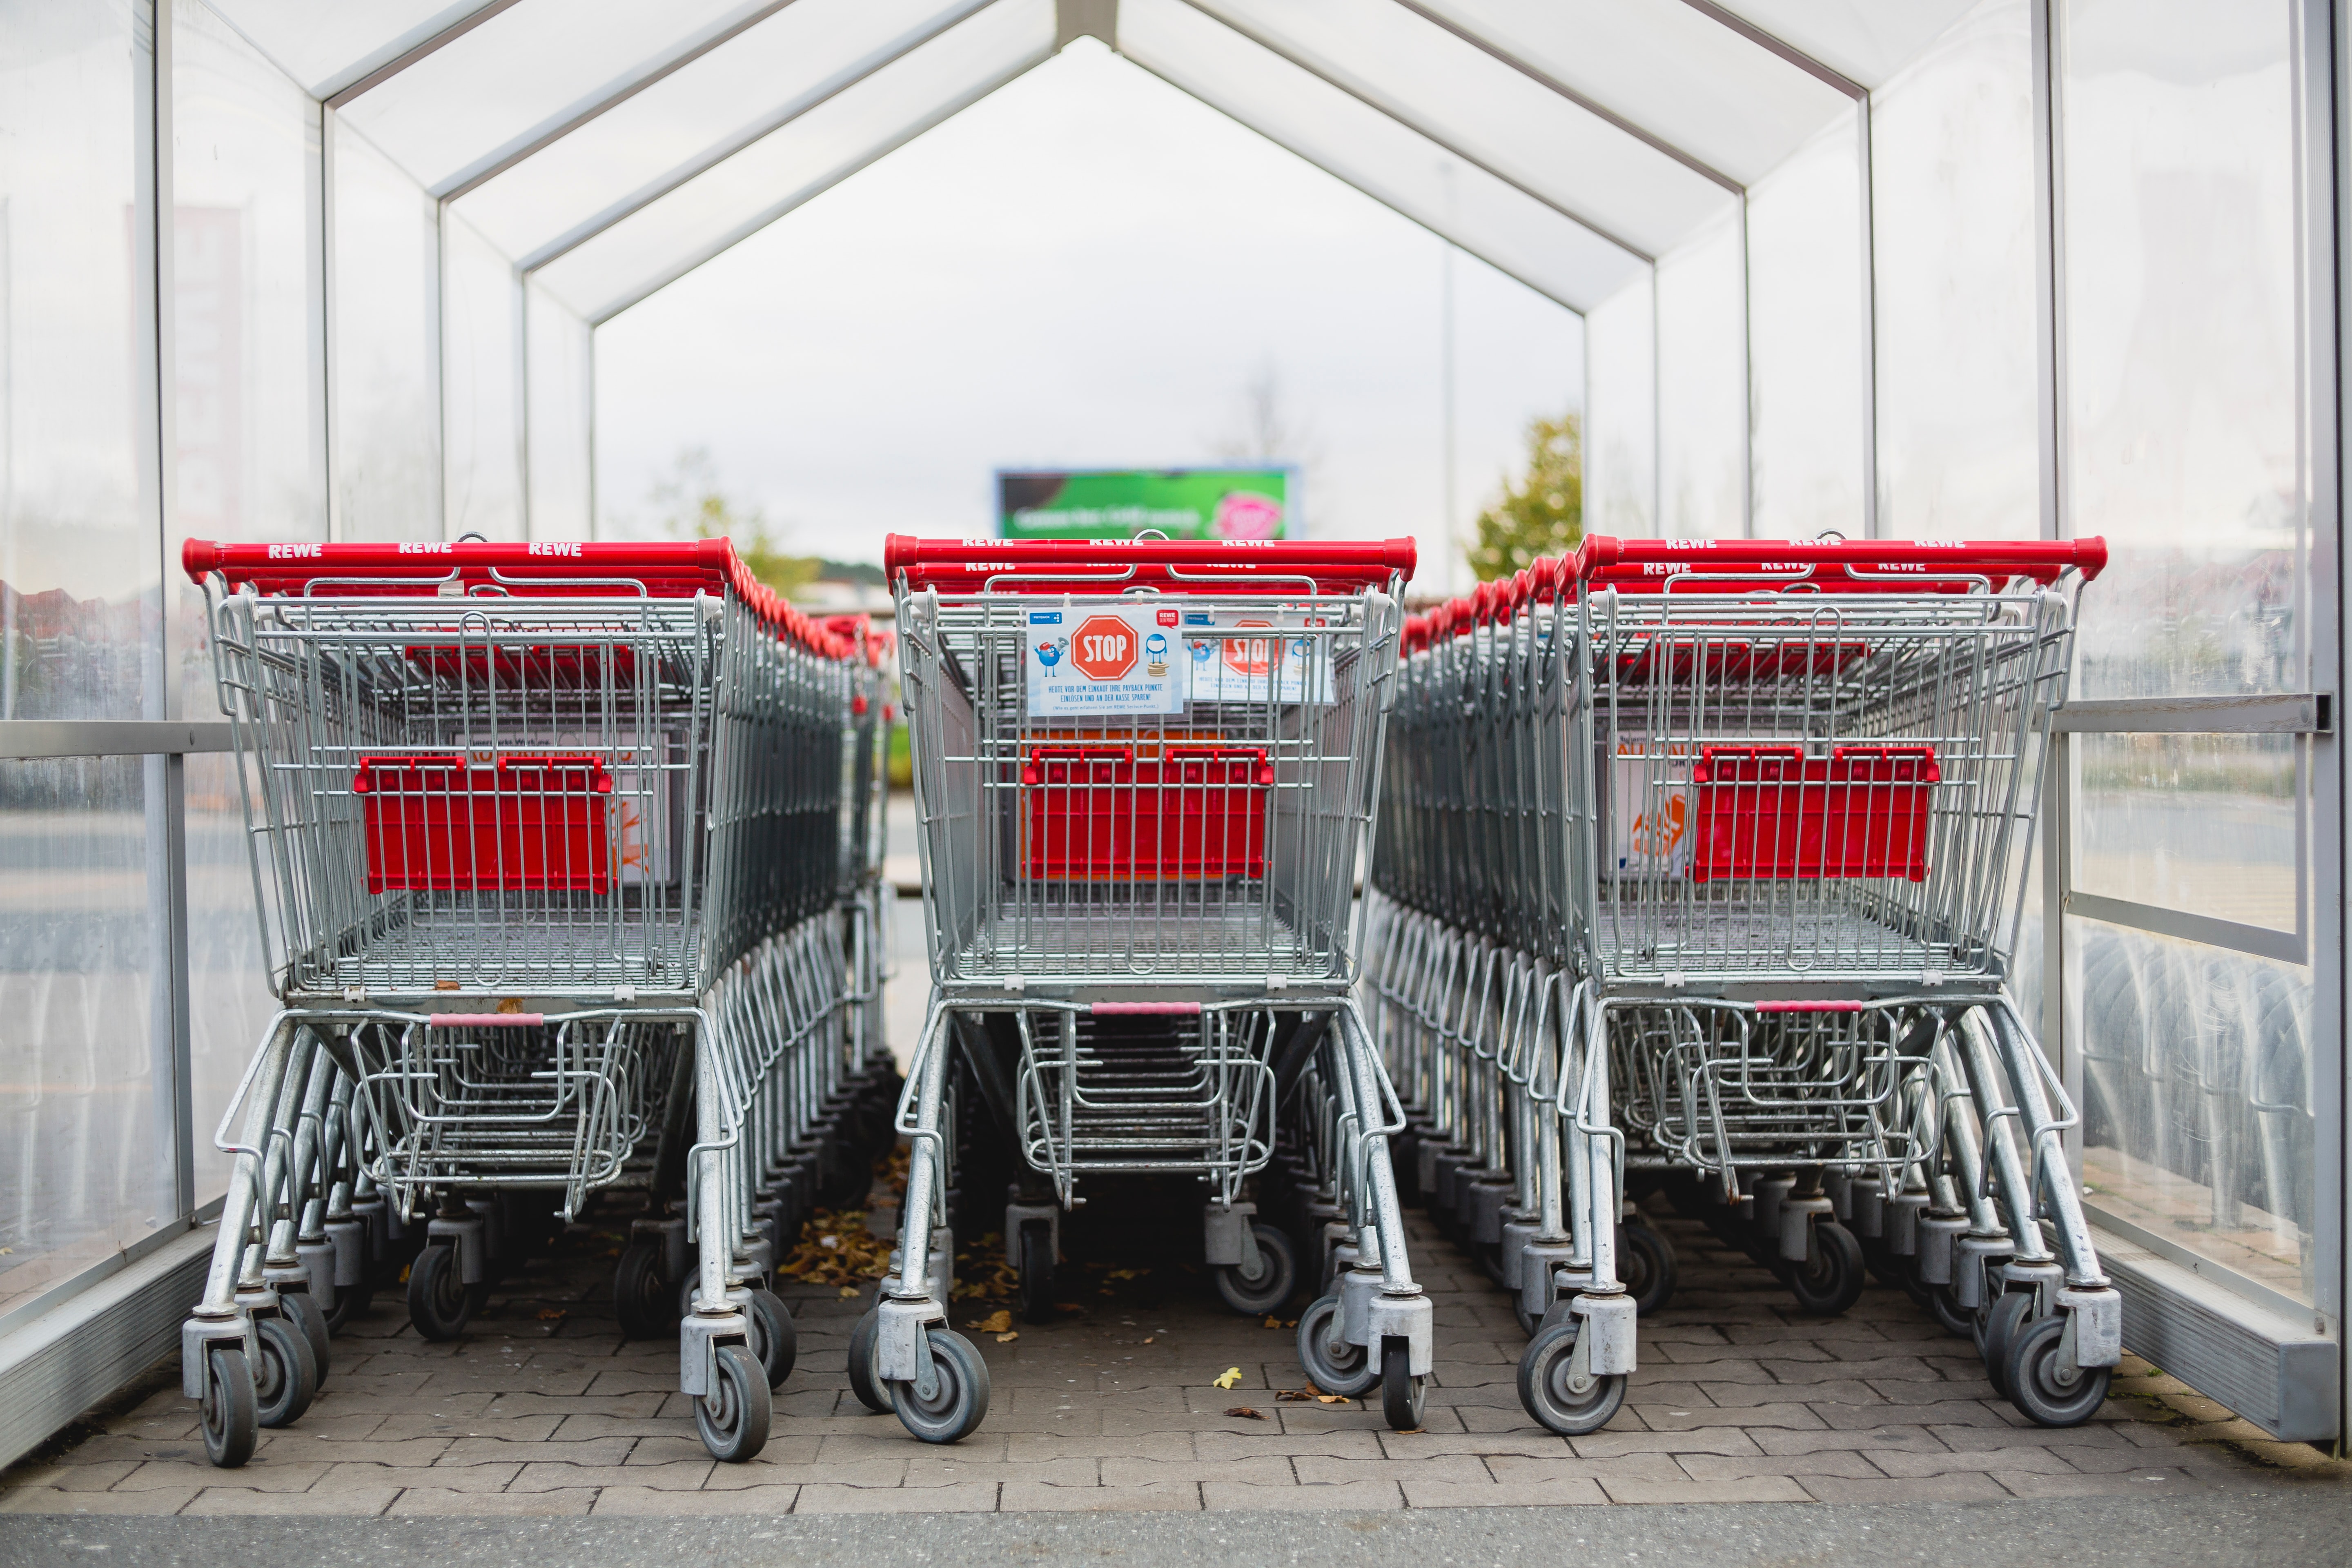 The Real World of Retail Distribution: How Being Prepared Can Lead To Big Wins